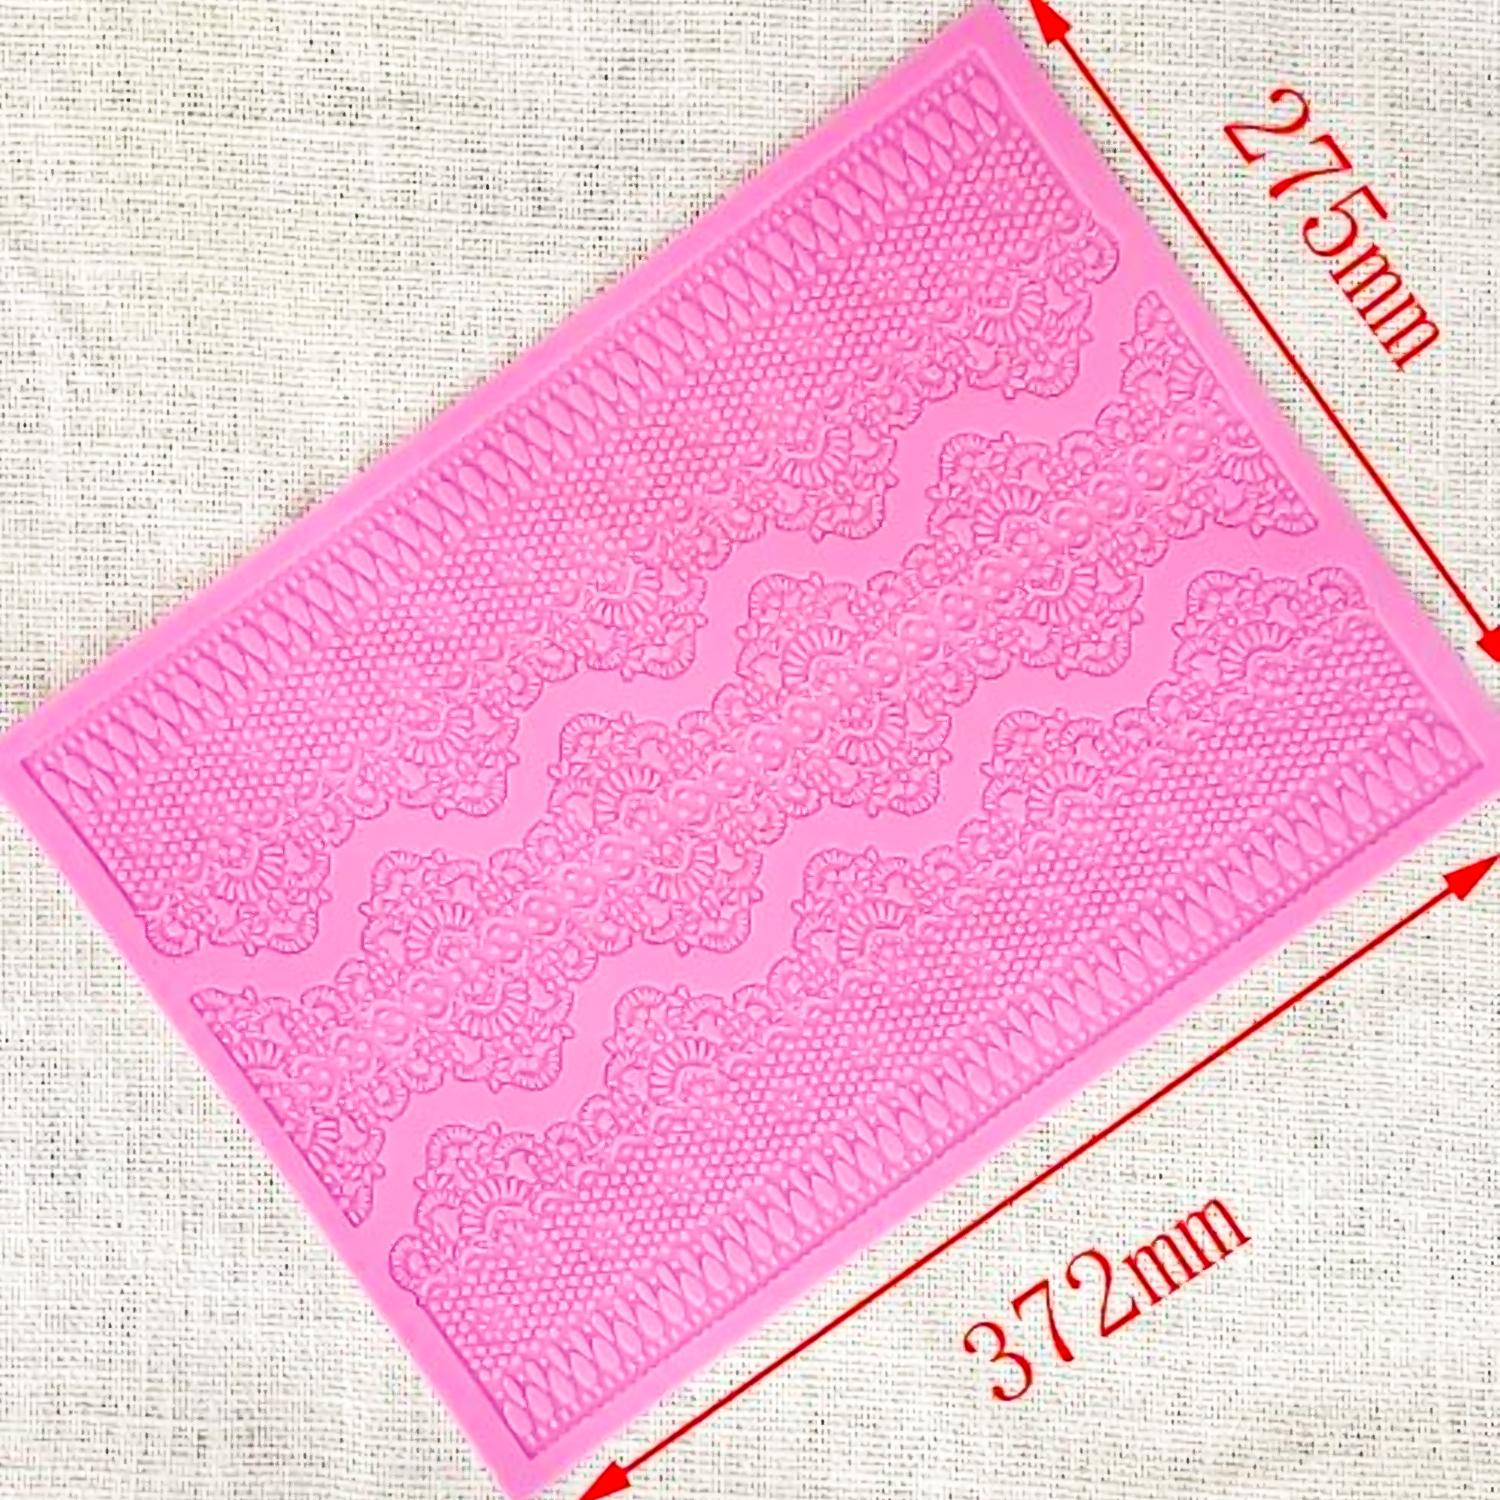 SLM0001 CHANTILLY STYLE SILICON LACE MAT